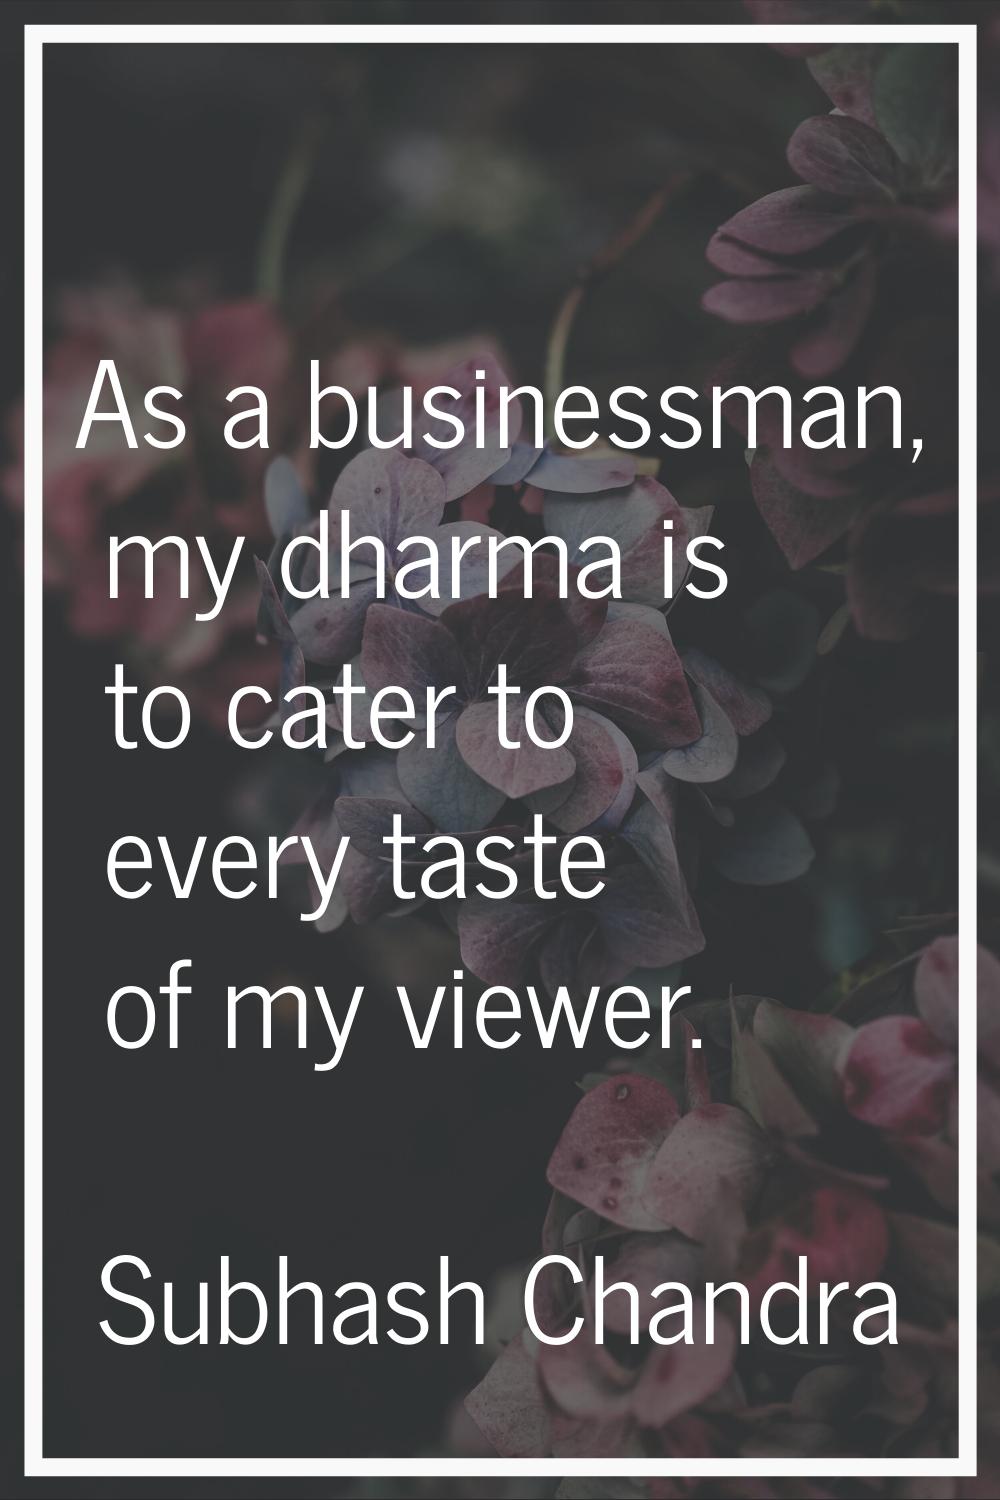 As a businessman, my dharma is to cater to every taste of my viewer.